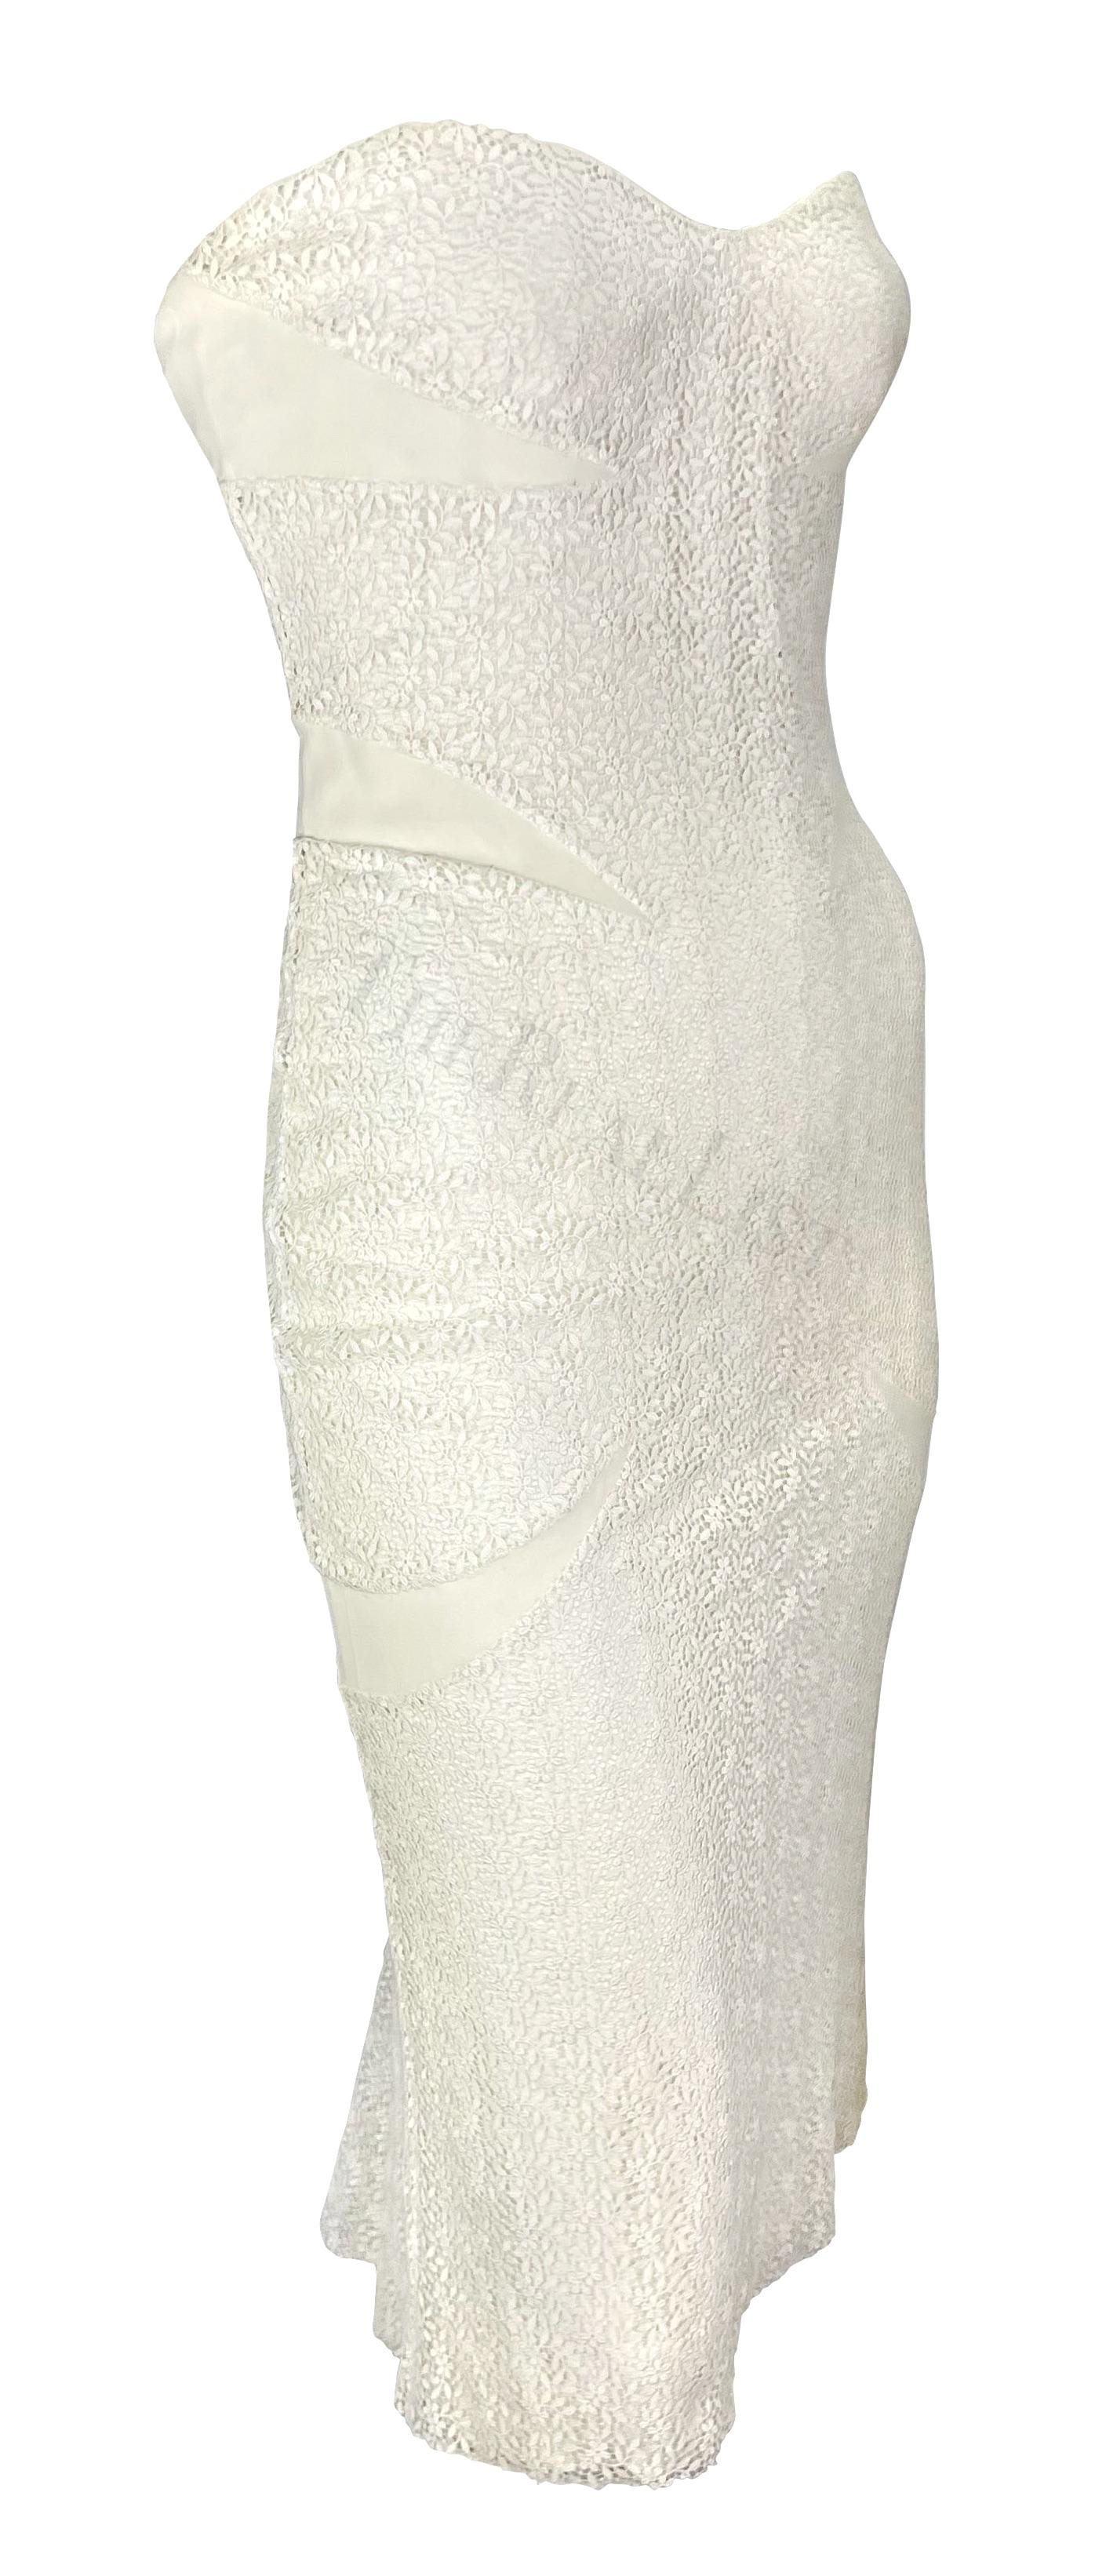 NWT S/S 2002 Gianni Versace by Donatella White Floral Lace Strapless Dress For Sale 4